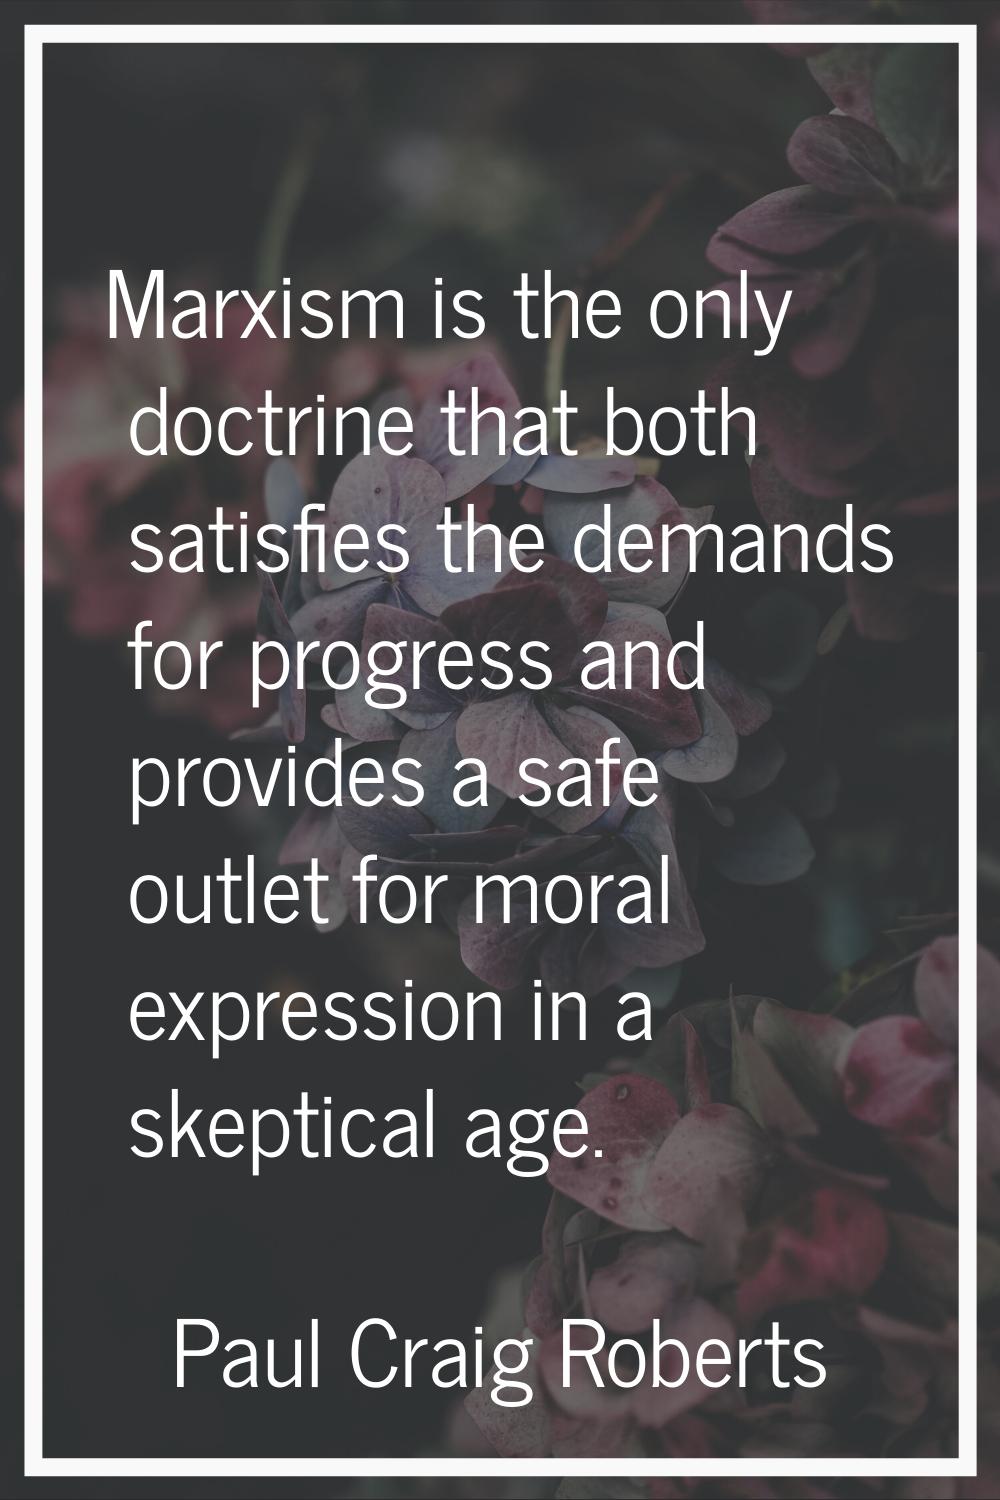 Marxism is the only doctrine that both satisfies the demands for progress and provides a safe outle